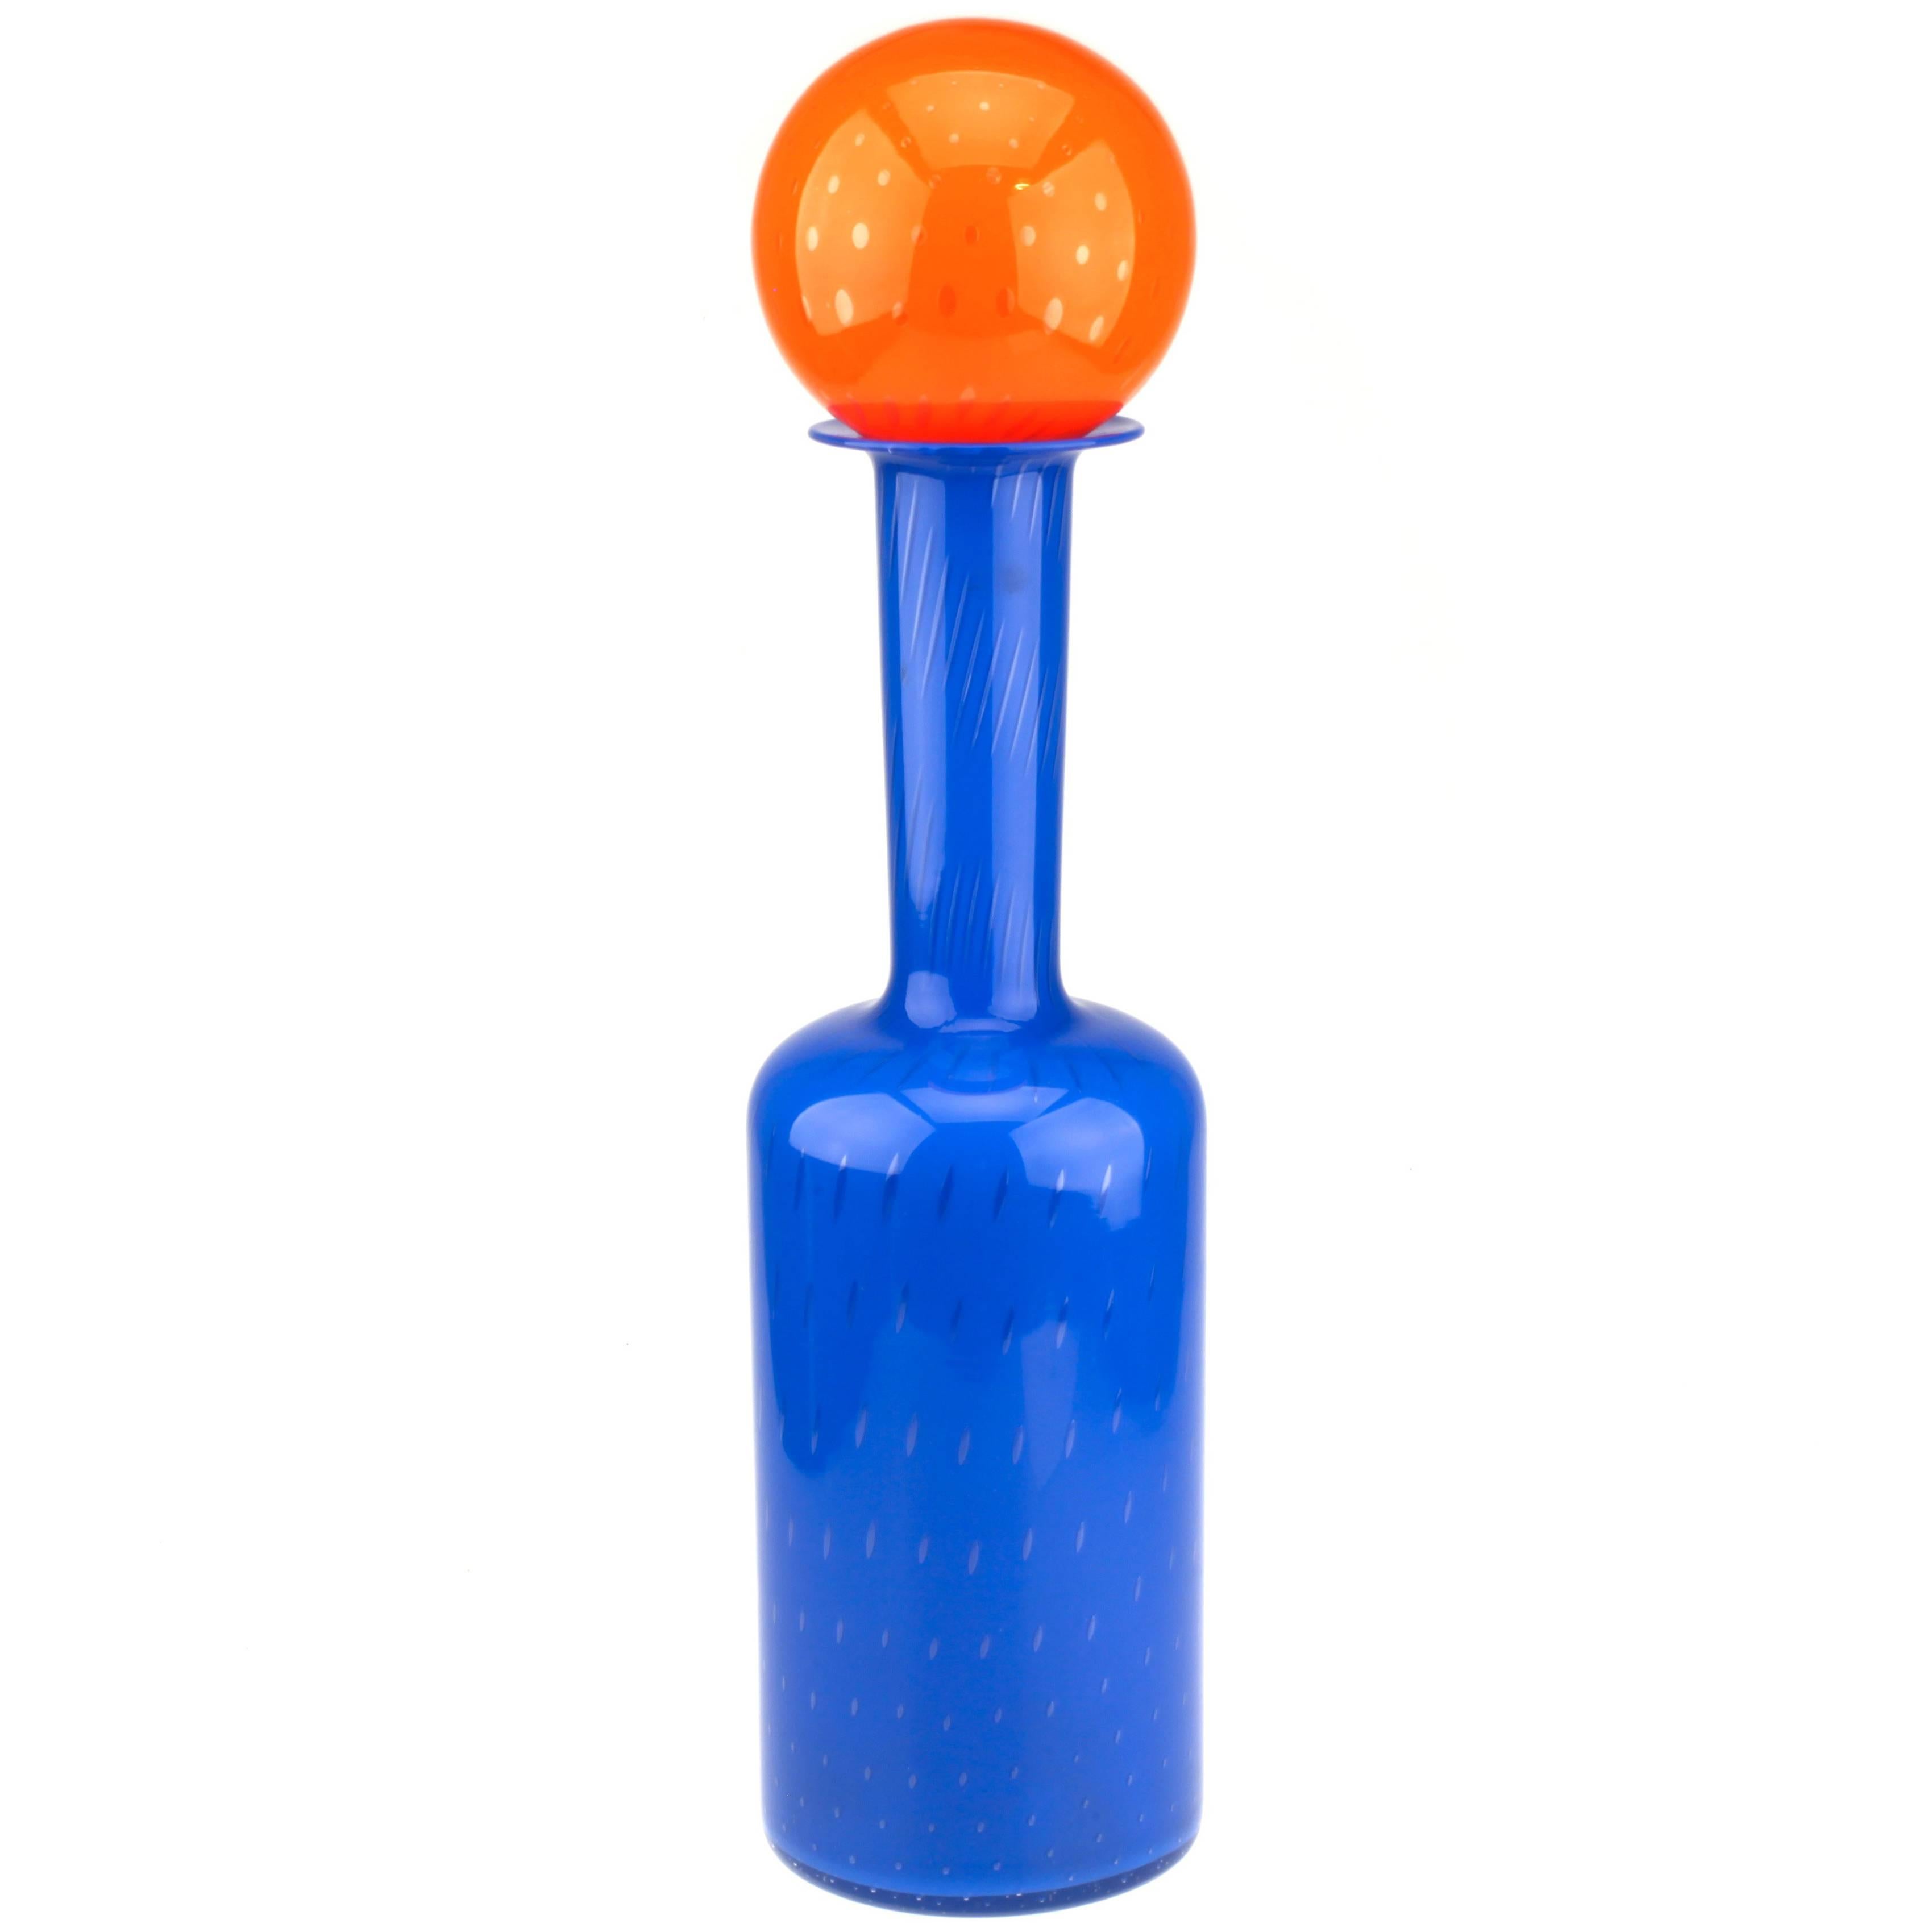 Orange and Blue Empoli Art Glass Decanter with Ball Stopper For Sale